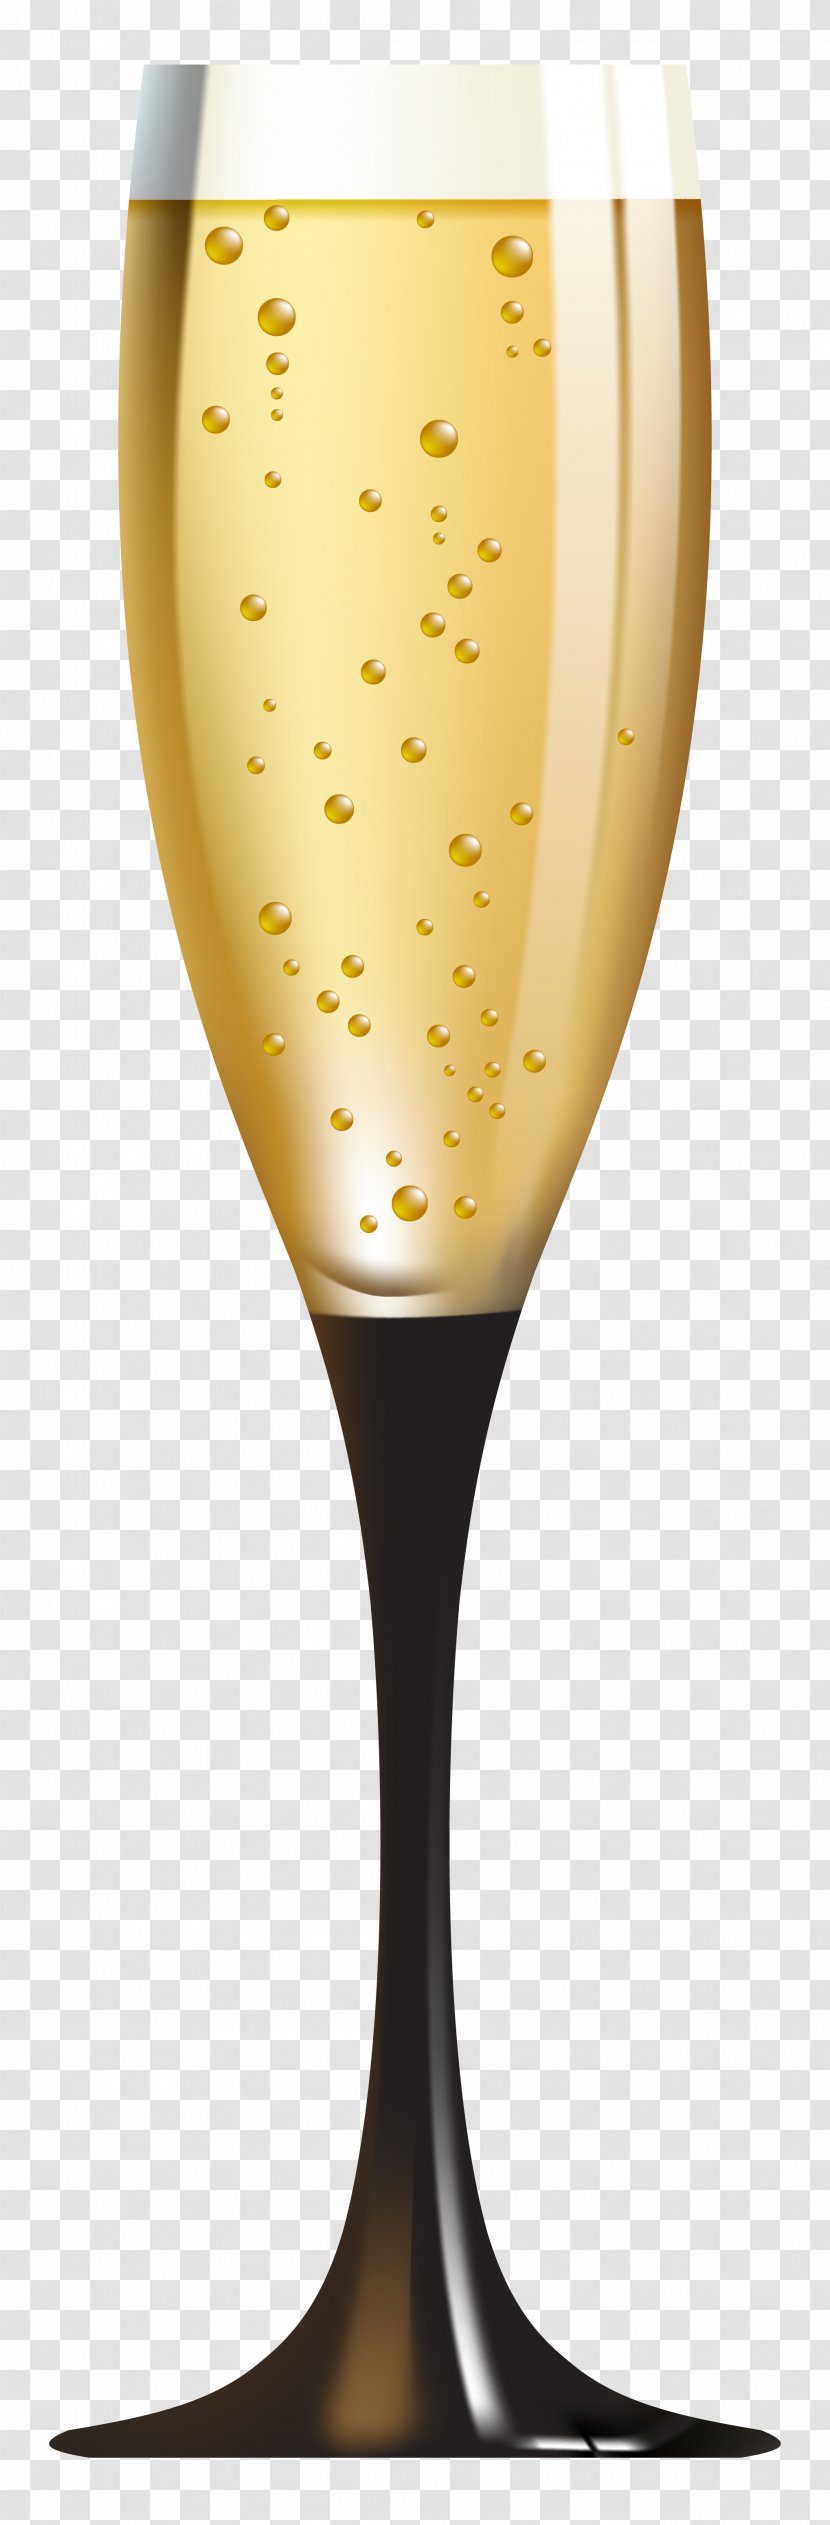 Champagne Glass Cocktail Wine Martini - Of Clipart Imag Transparent PNG